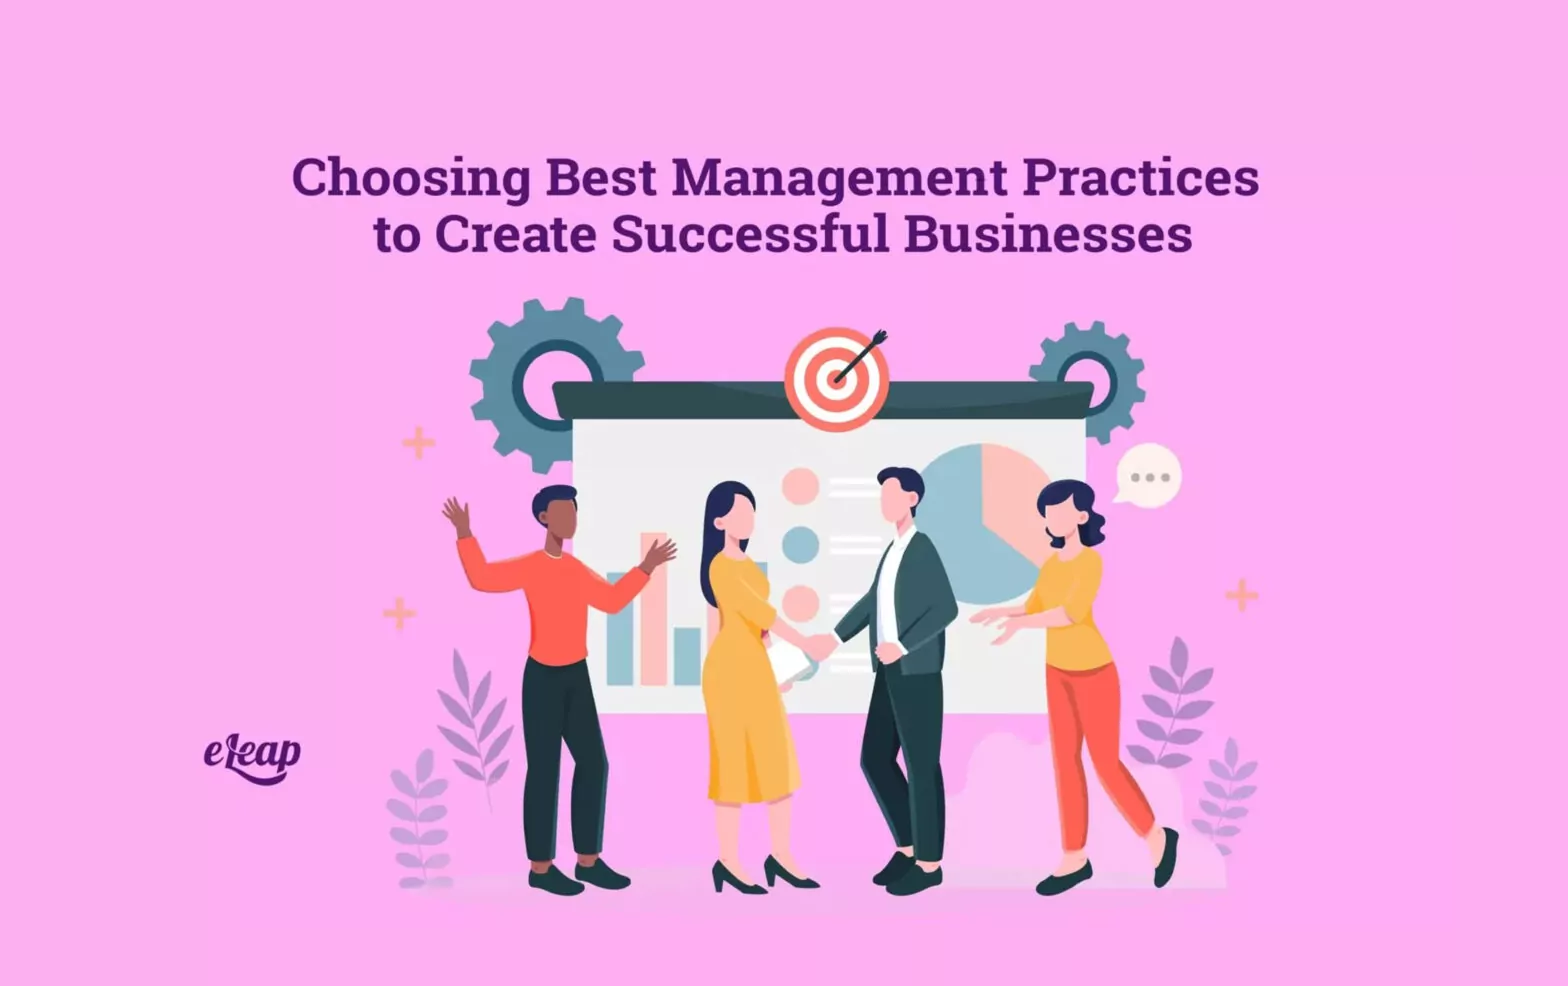 Choosing Best Management Practices to Create Successful Businesses